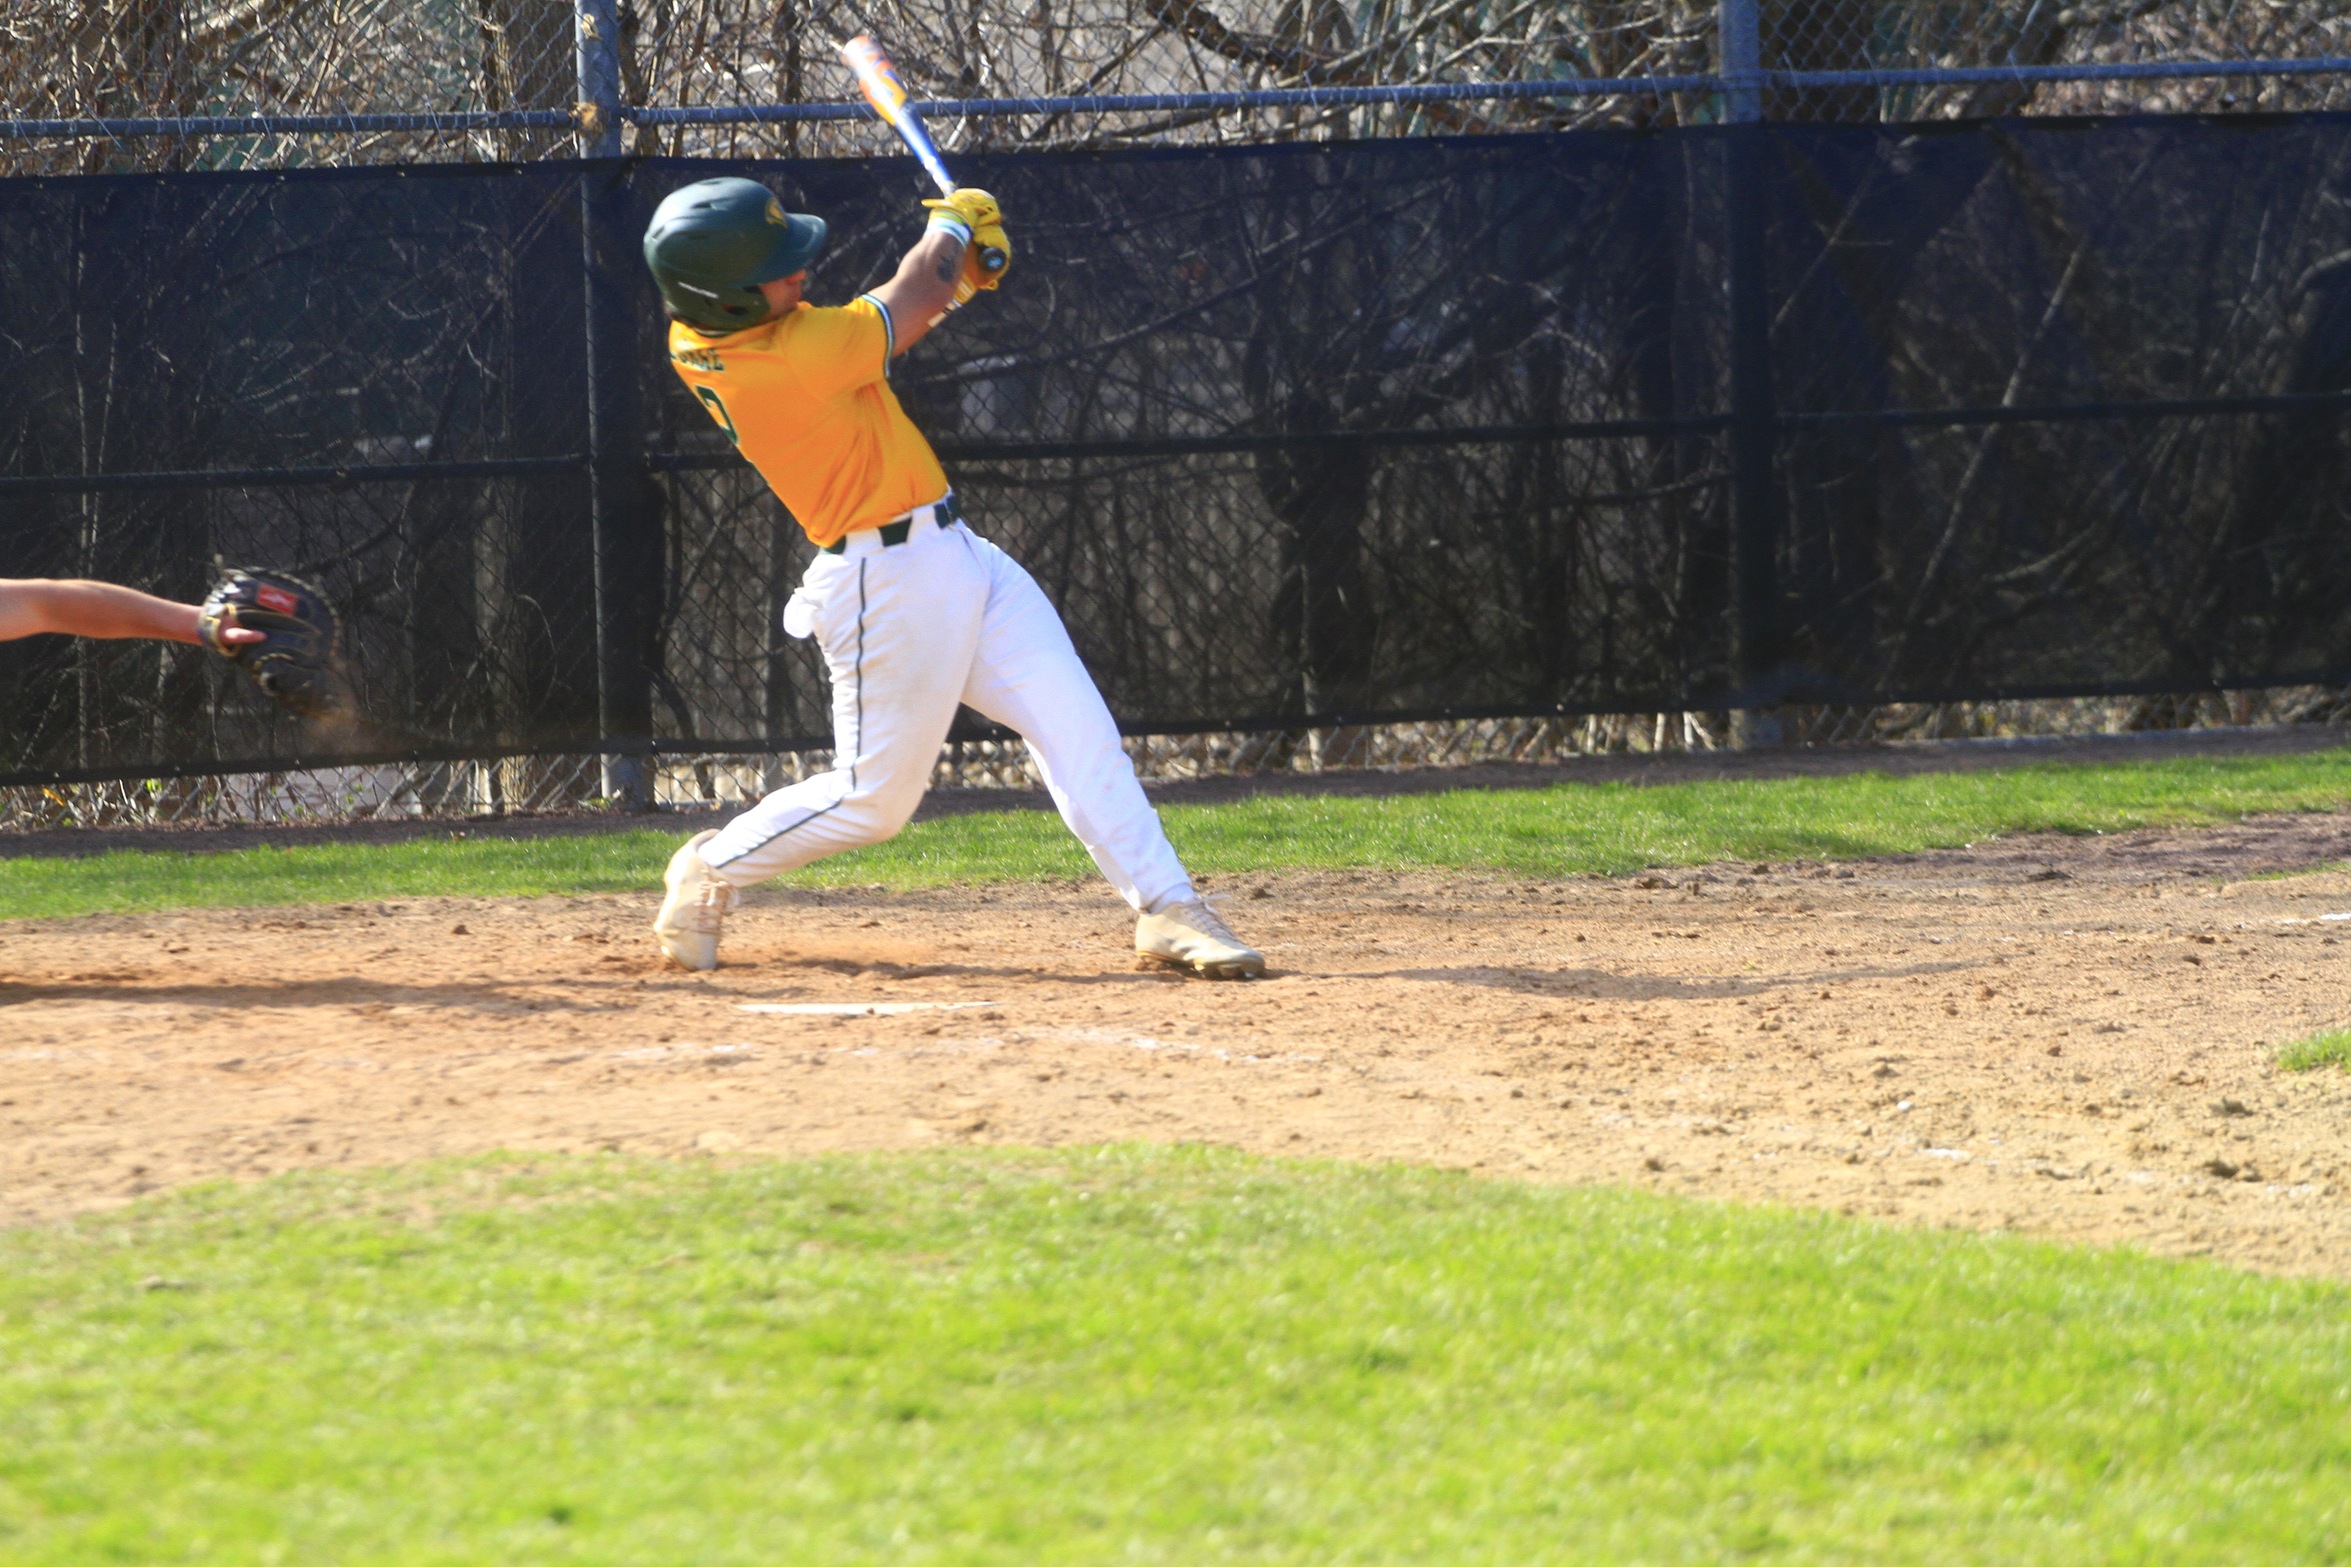 Baseball Swept By Lancers In Conference Twin Bill